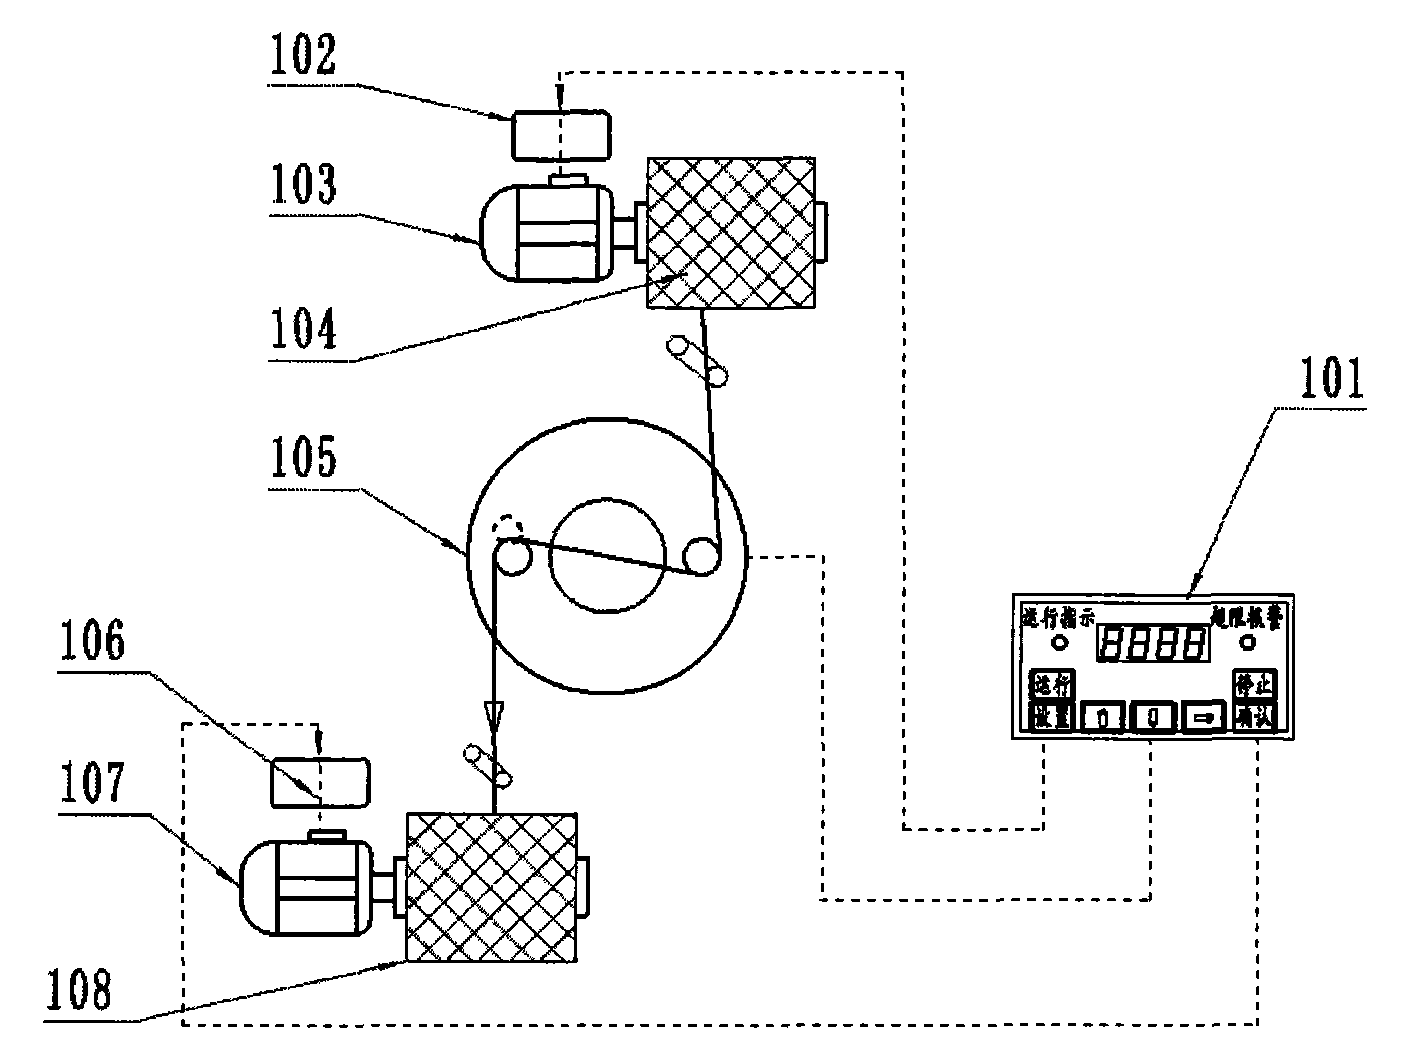 On-line detection and real-time control devices for tension of yarn